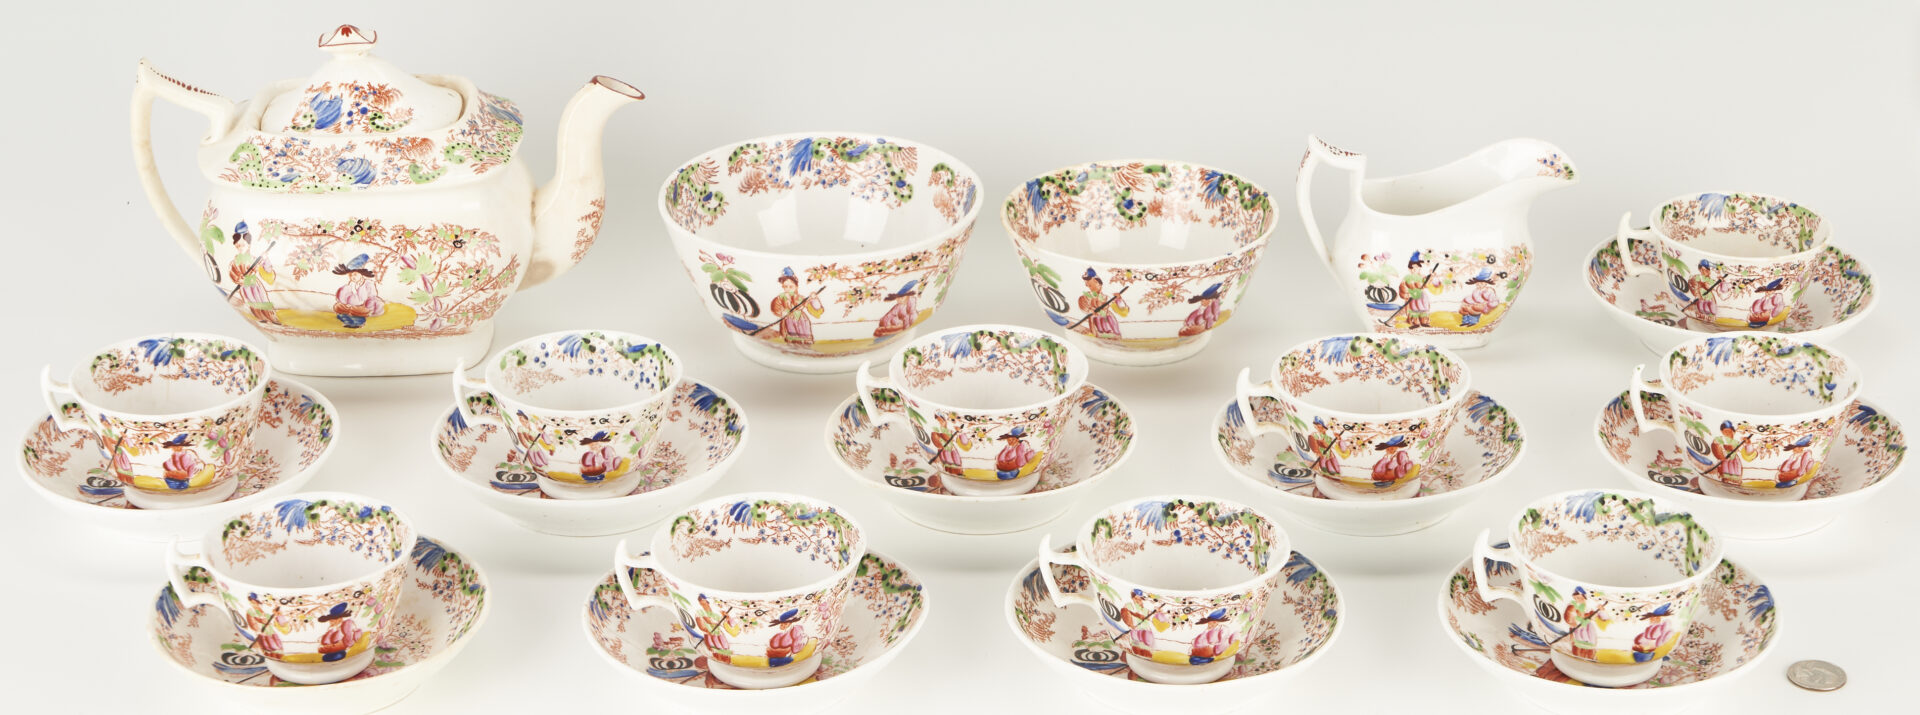 Lot 54: 32 Chinese Export & English Porcelain Tea Items